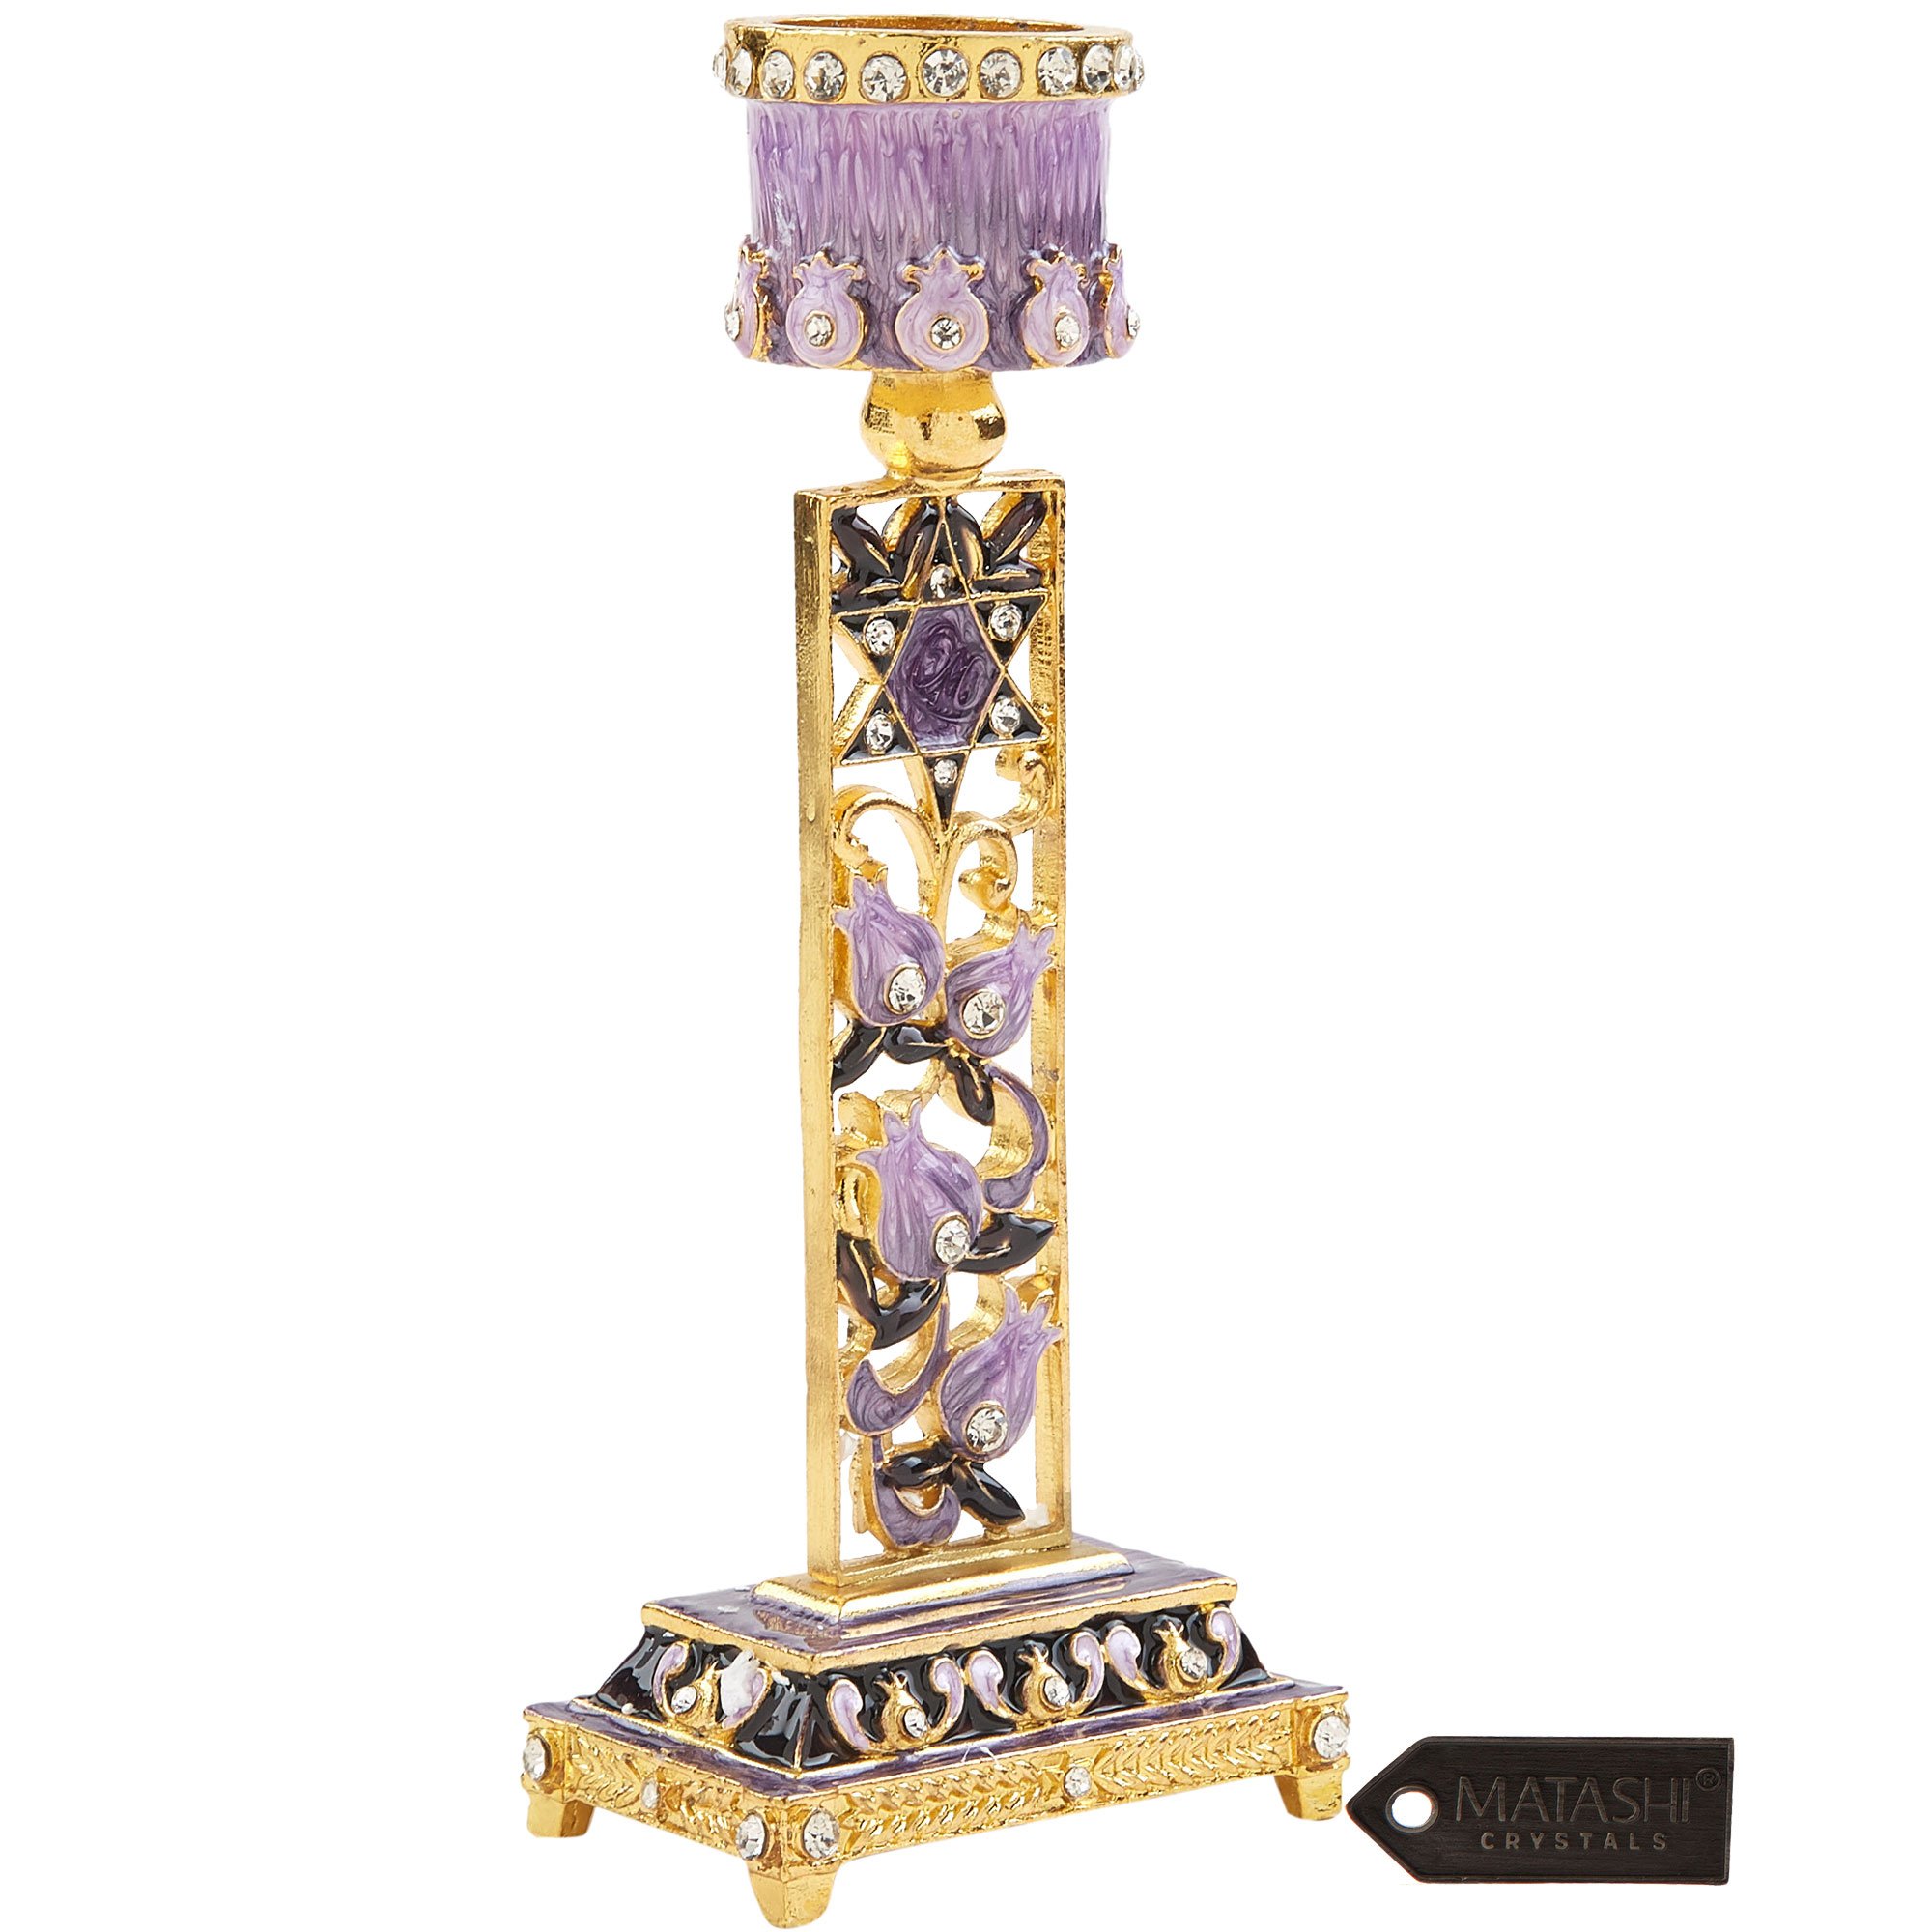 Shabbat Candlestick (2-Piece Set) Hand-Painted, Gold-Plated Pewter ,Personal Or Religious Enjoyment (Purple) By Matashi